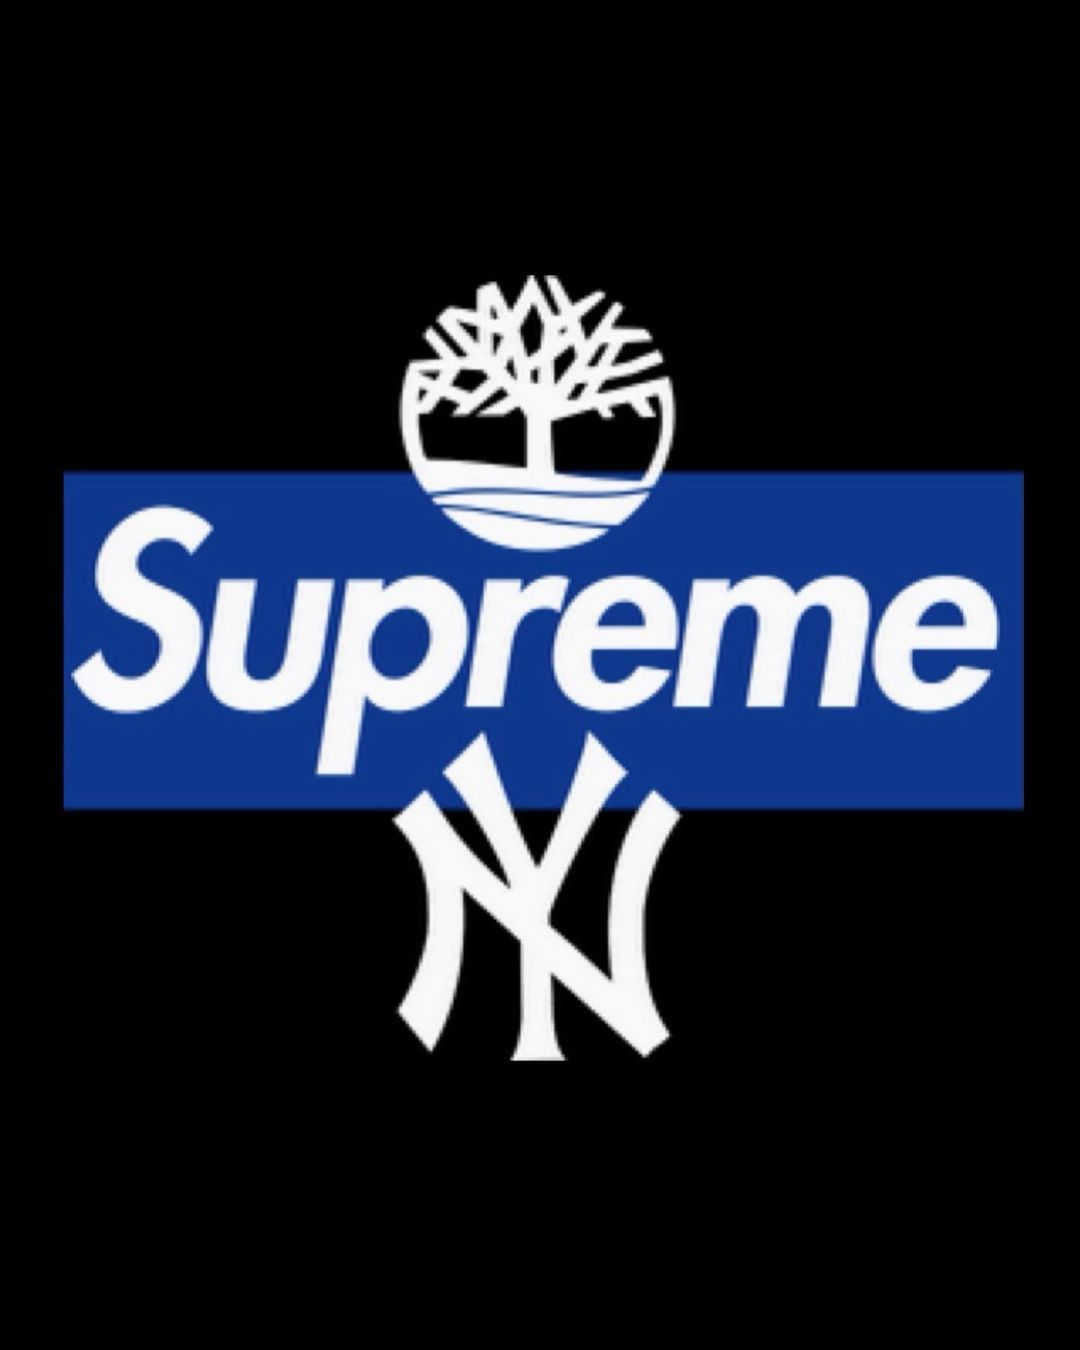 supreme-timberland-new-york-yankees-boot-release-21aw-21fw